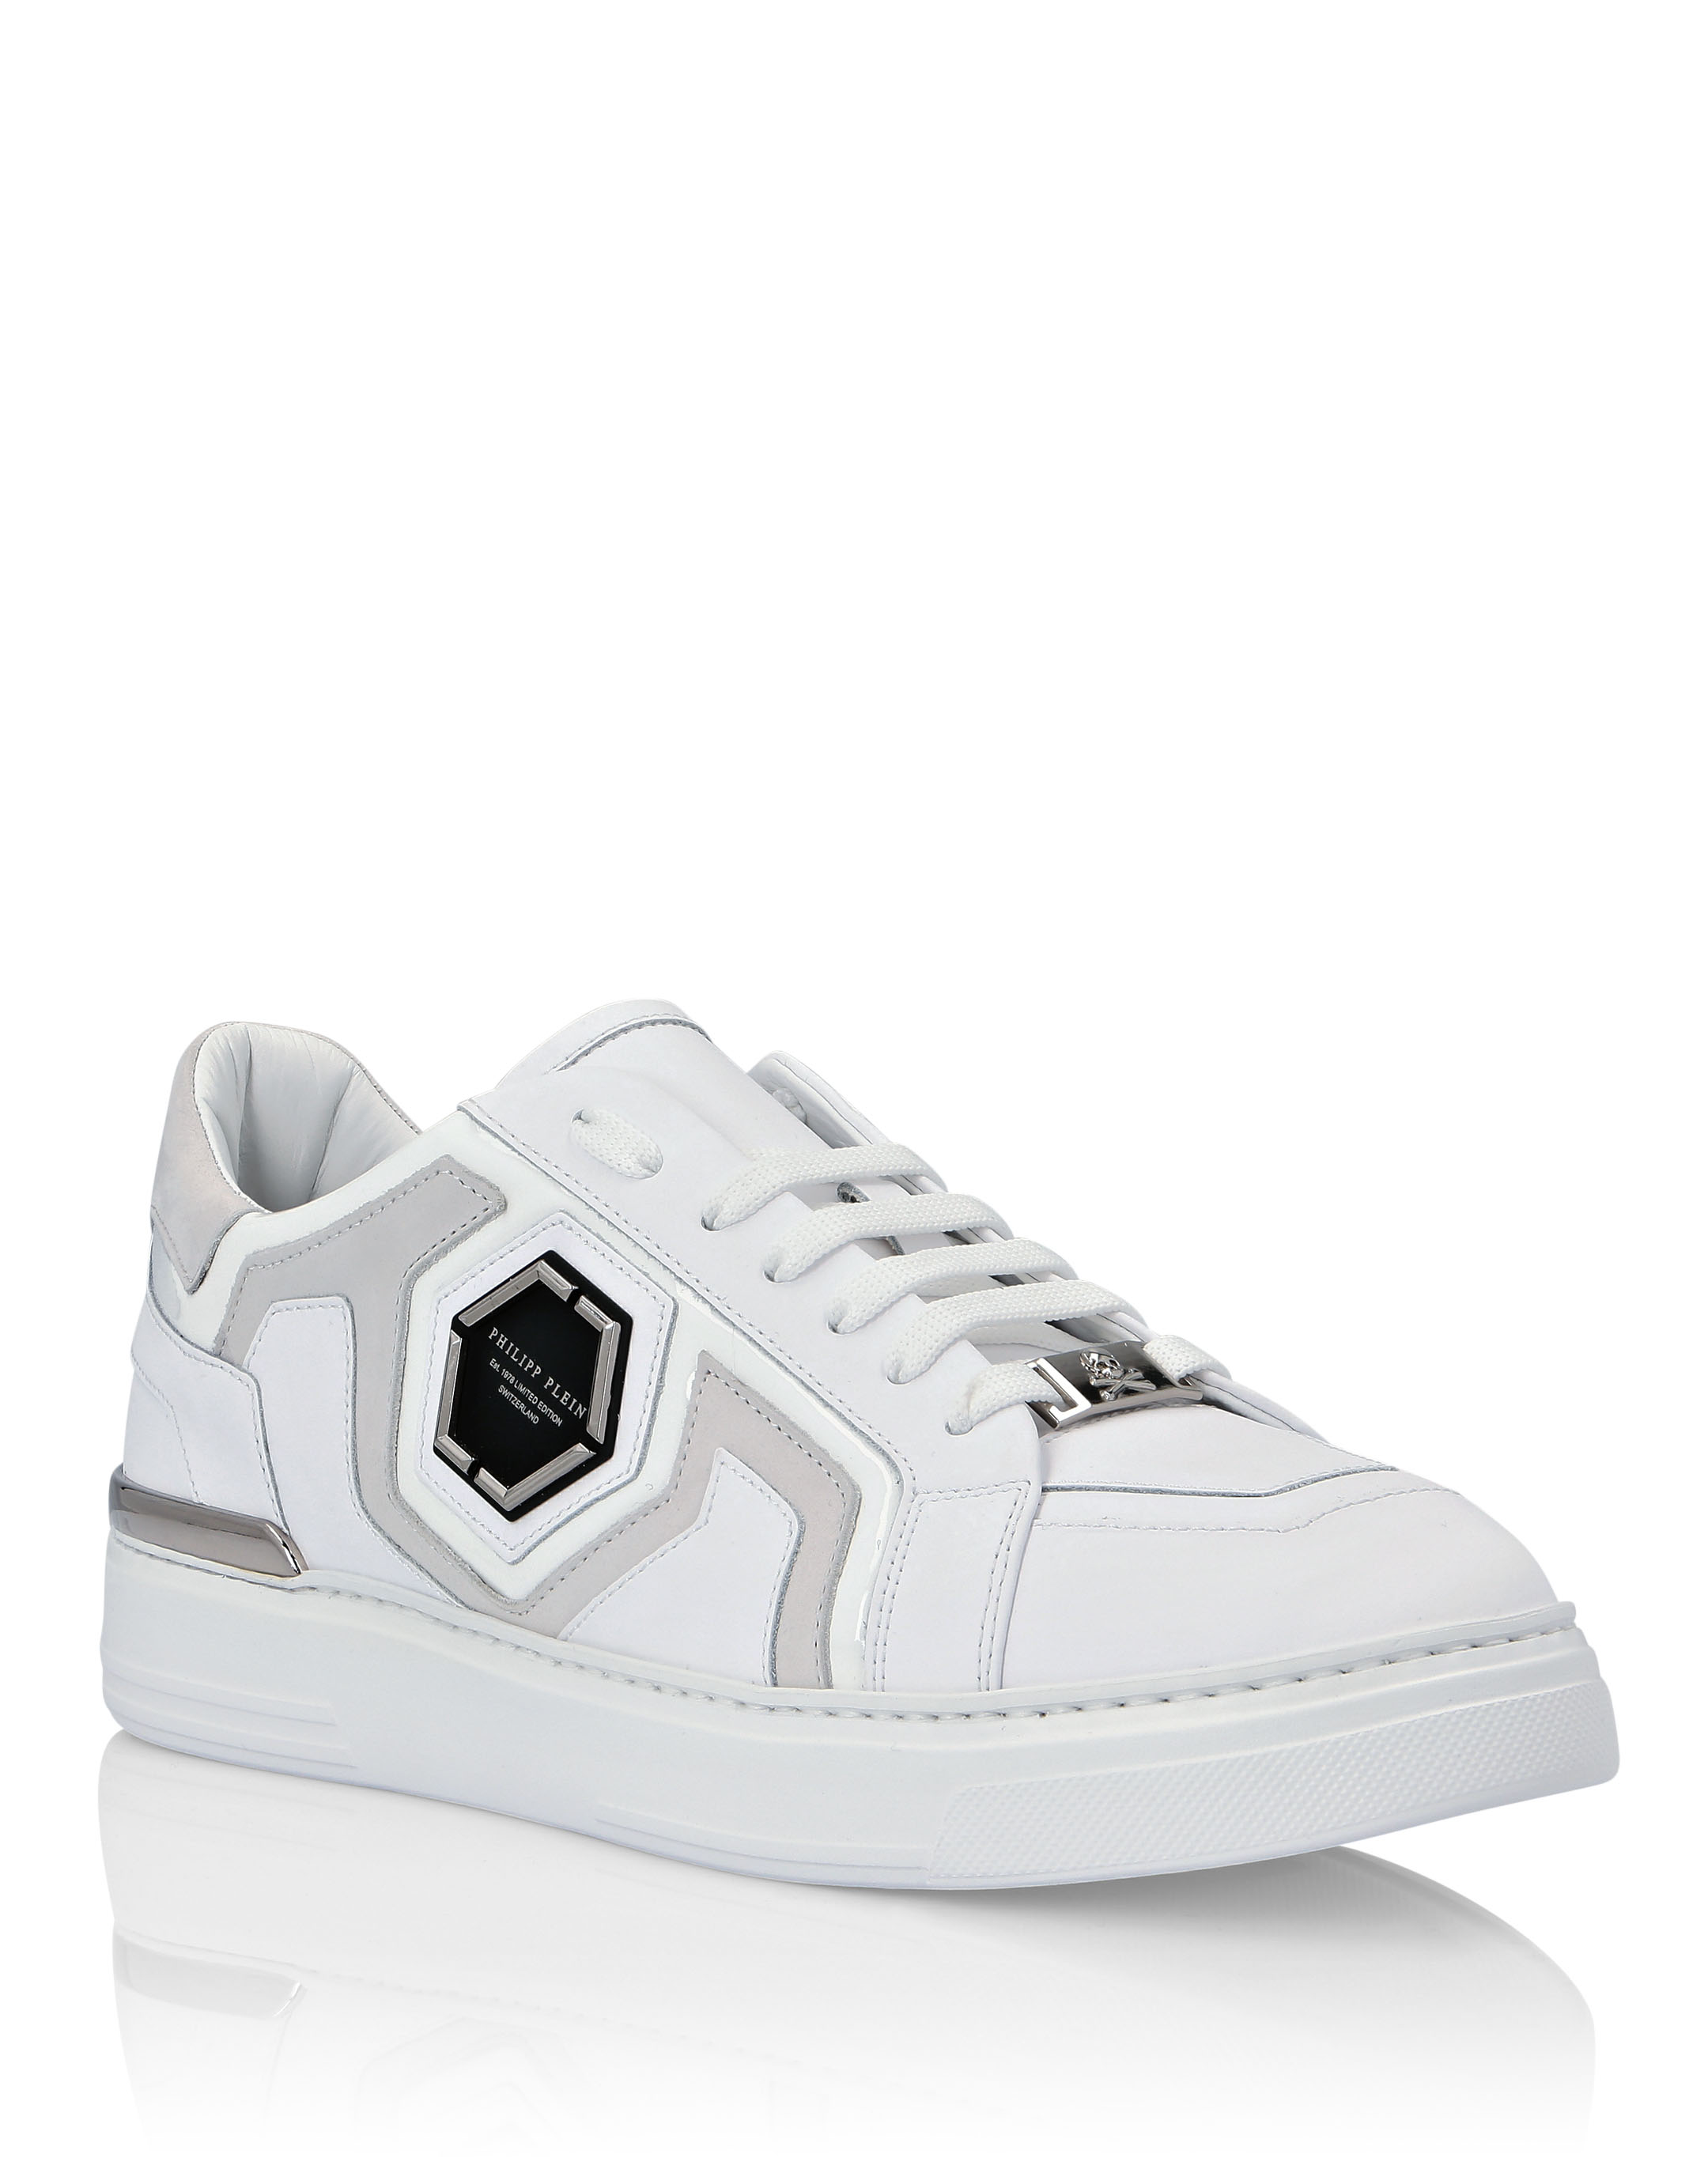 philipp plein limited edition shoes